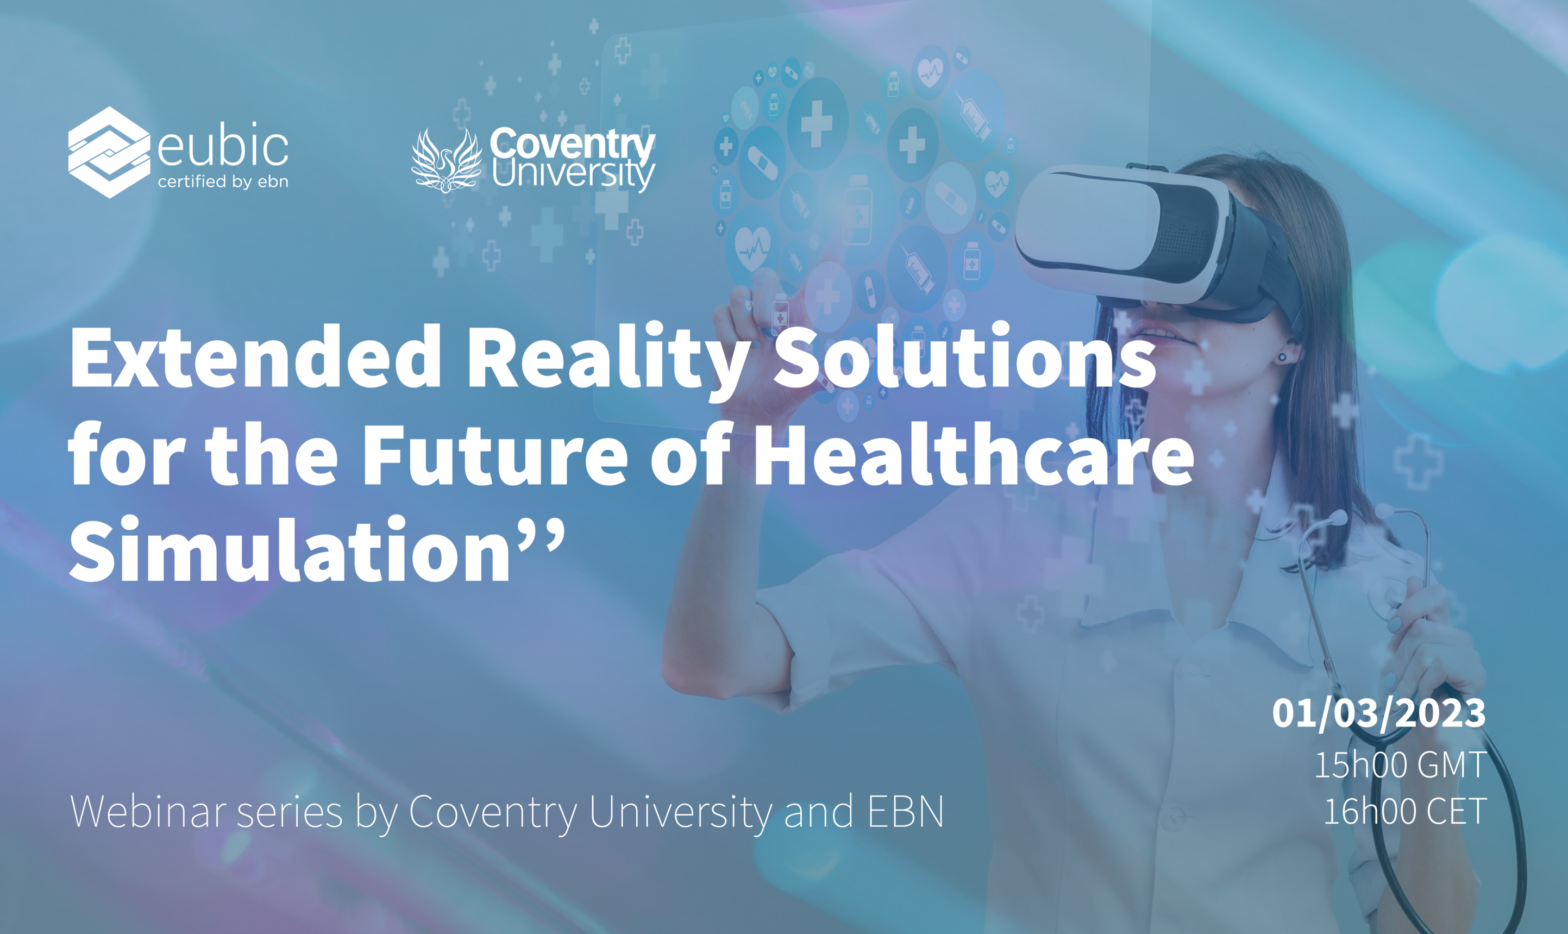 Young lady using extended reality solutions for healthcare. Details about the webinar.